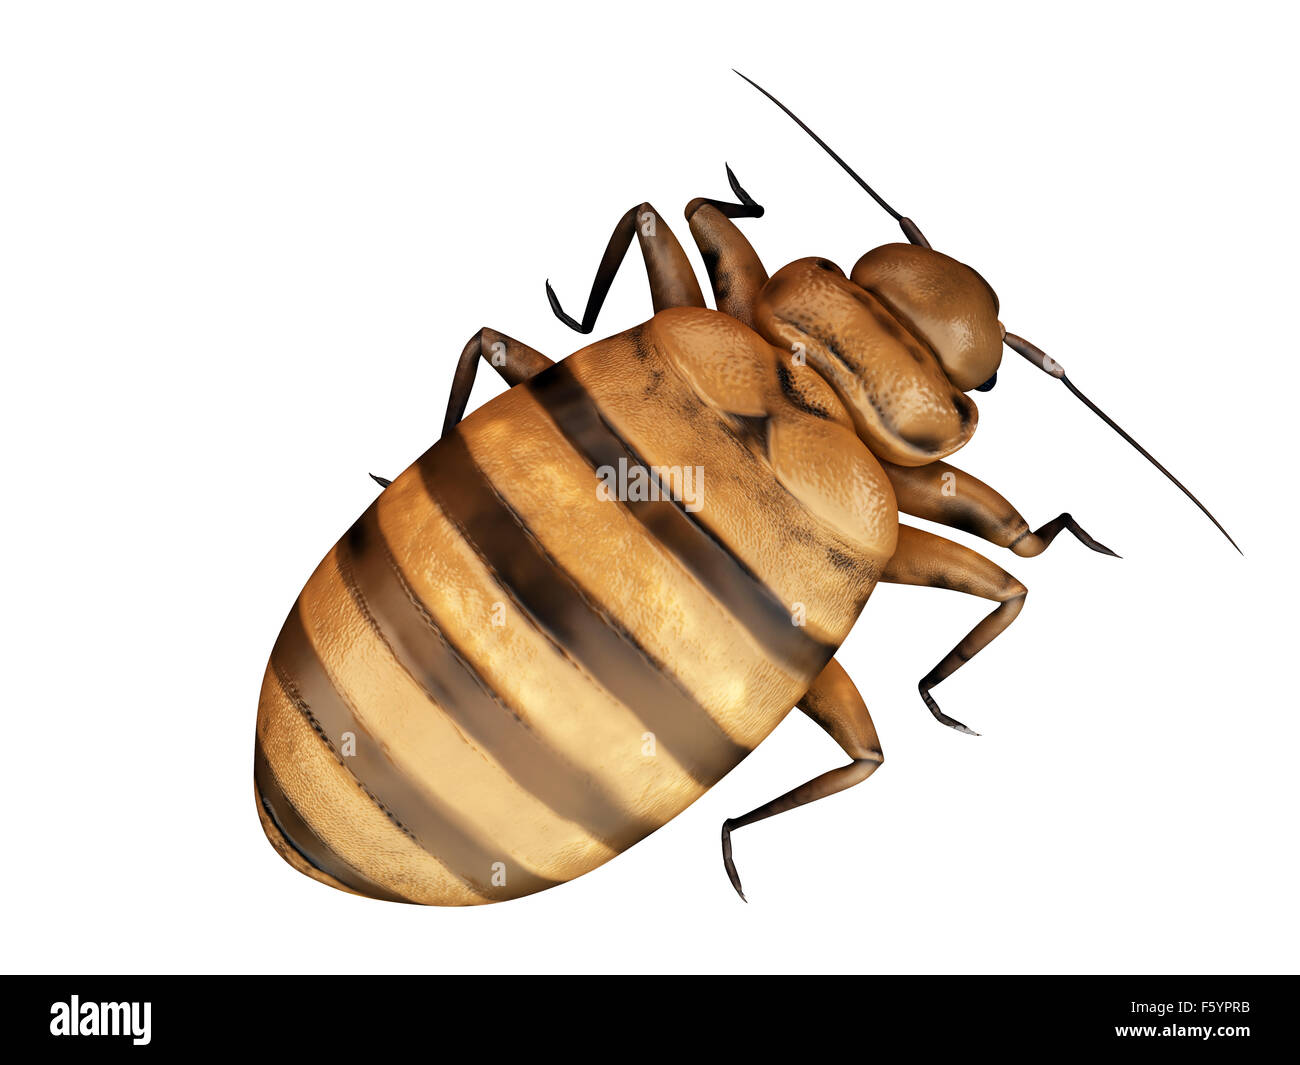 medically accurate illustration of a bed bug Stock Photo